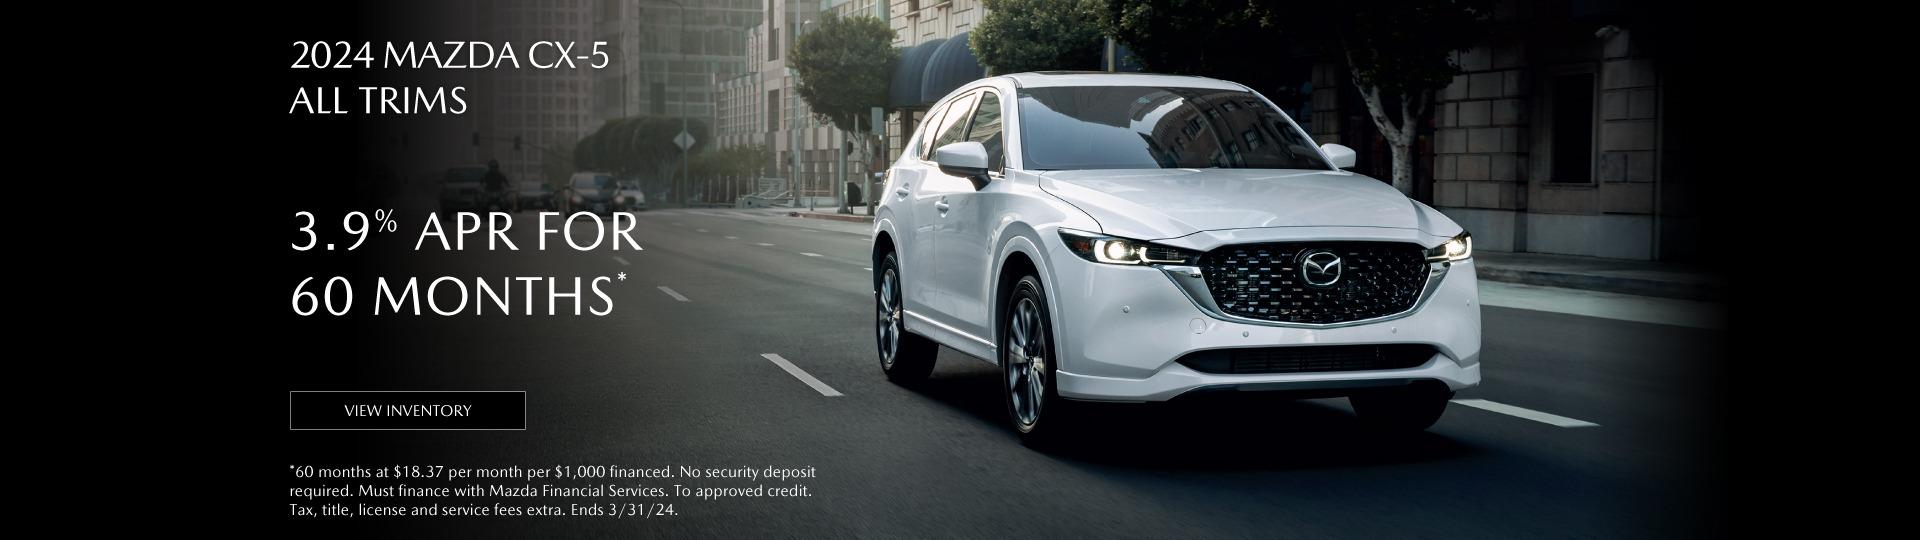 New 2024 Mazda CX-5  3.0% APR for 60 months